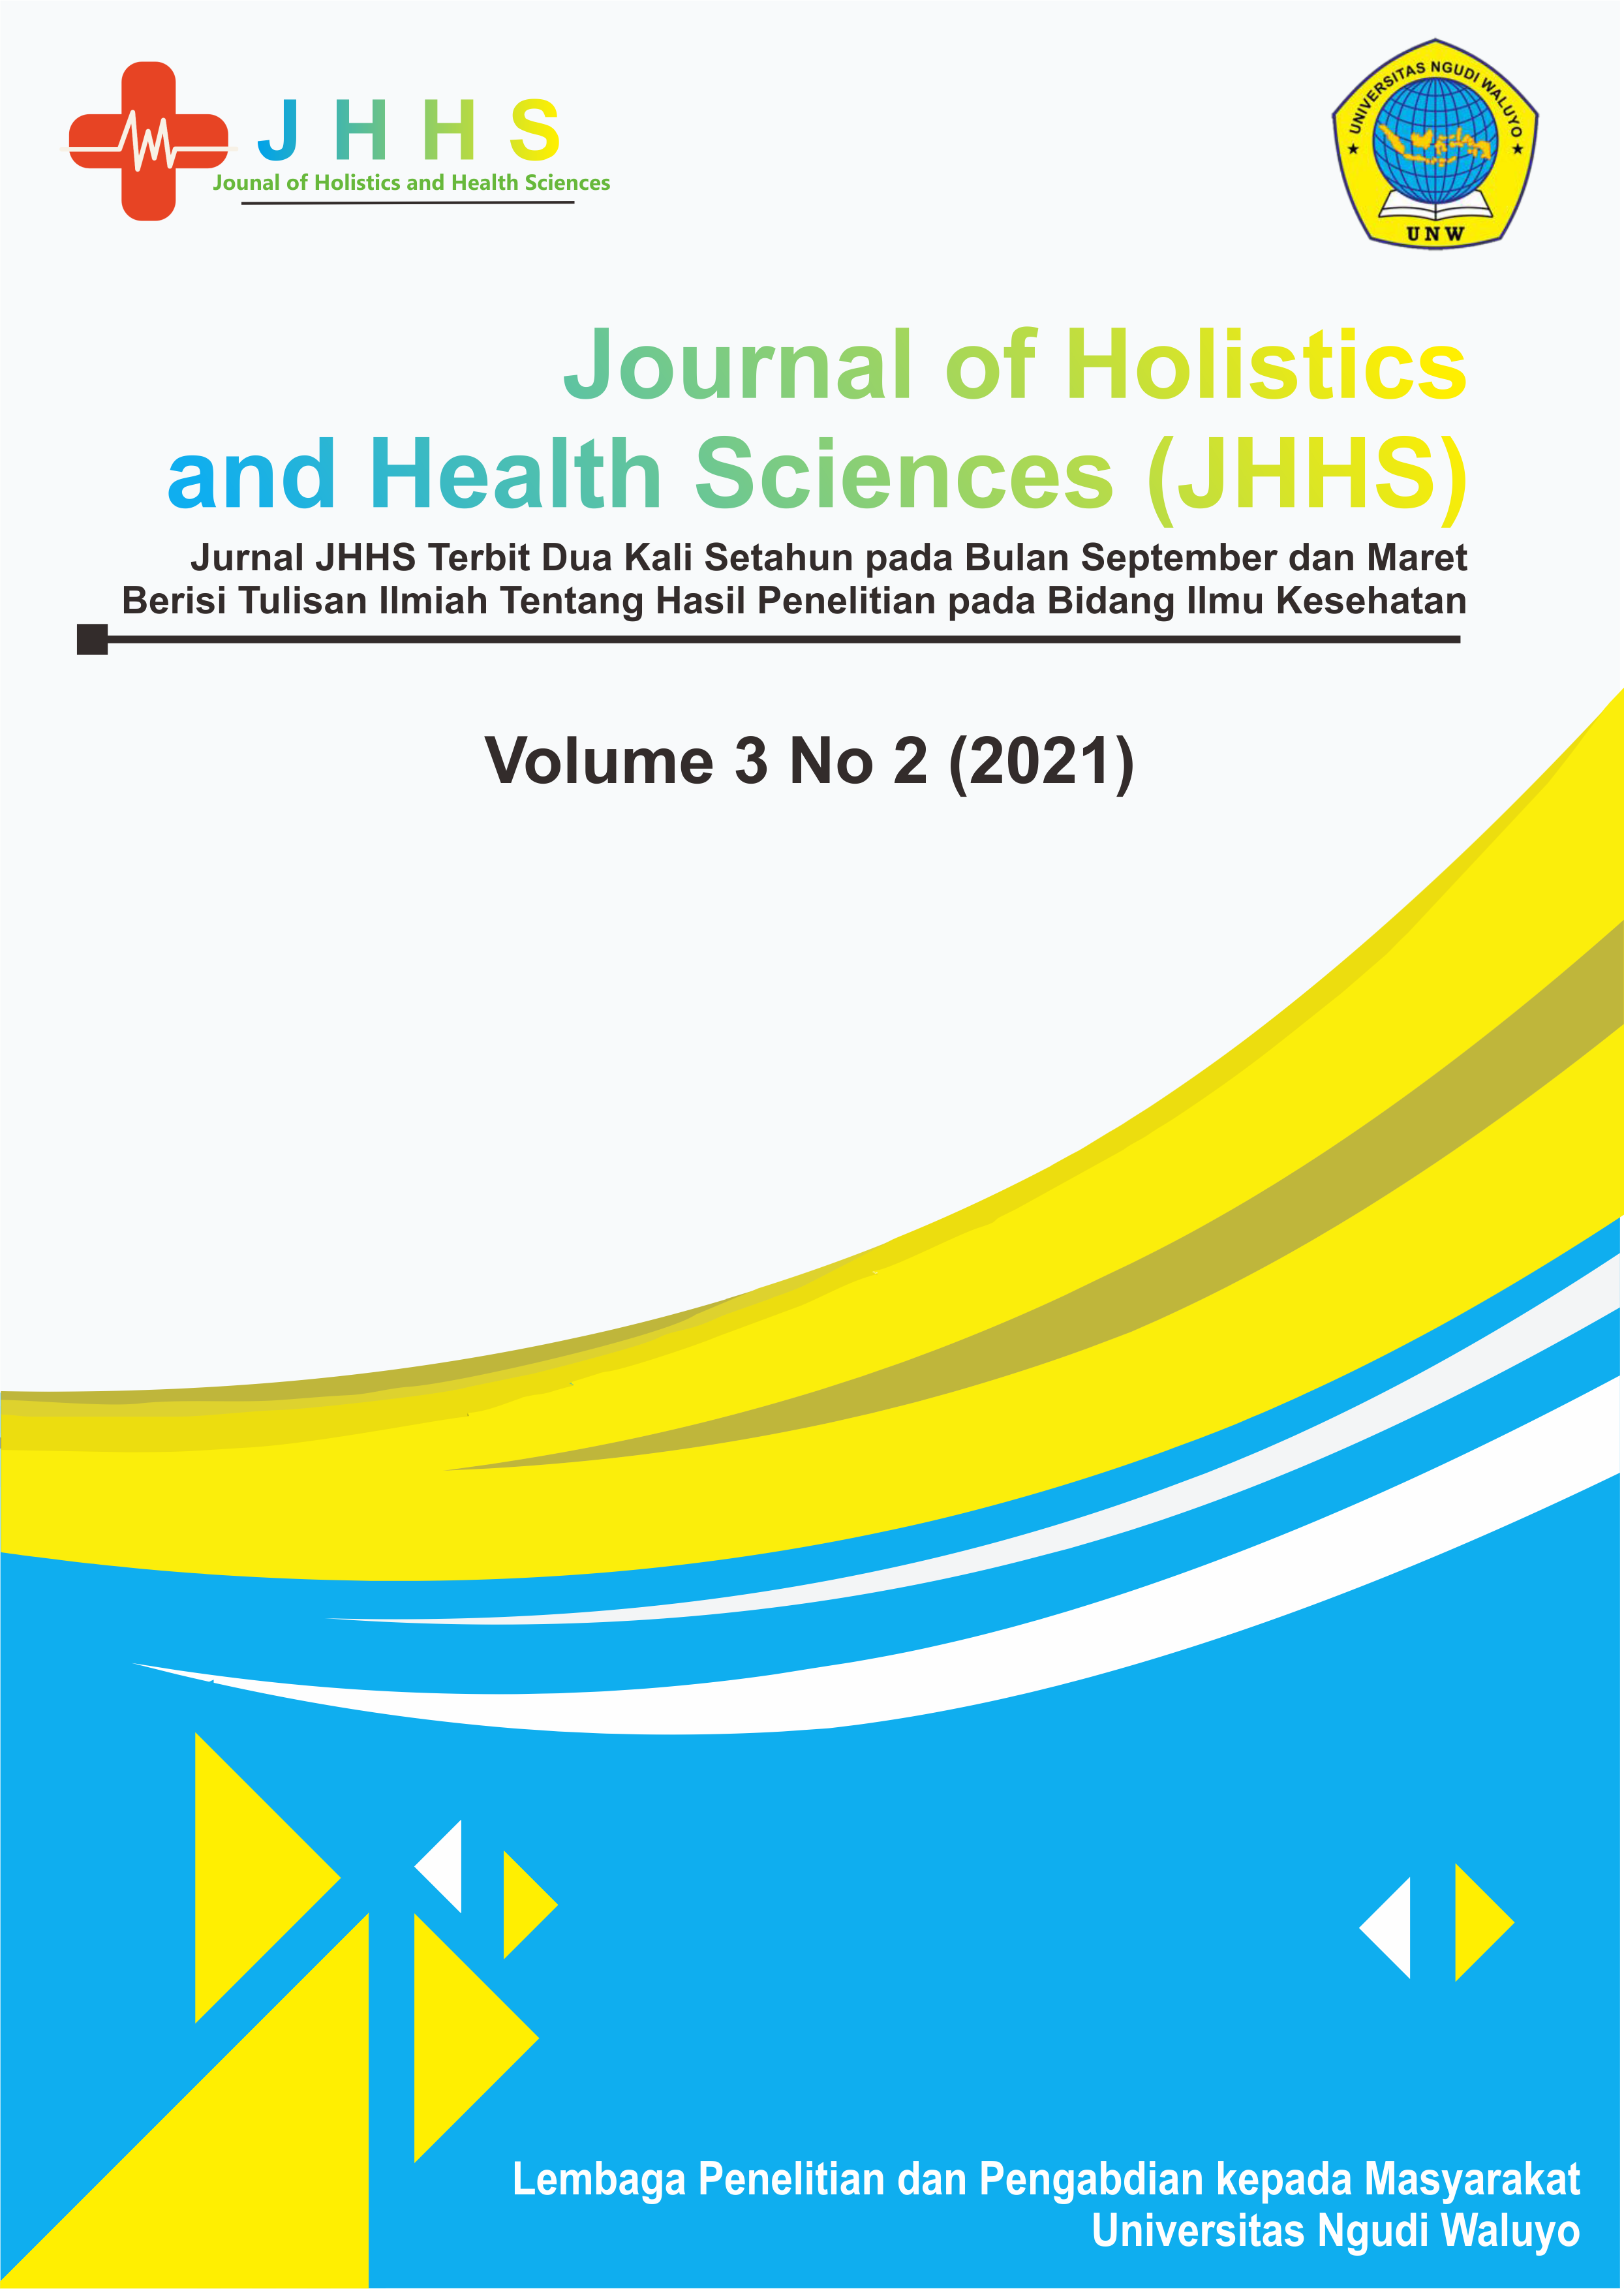 					View Vol. 3 No. 2 (2021): Journal of Holistics and Health Science (JHHS), September
				